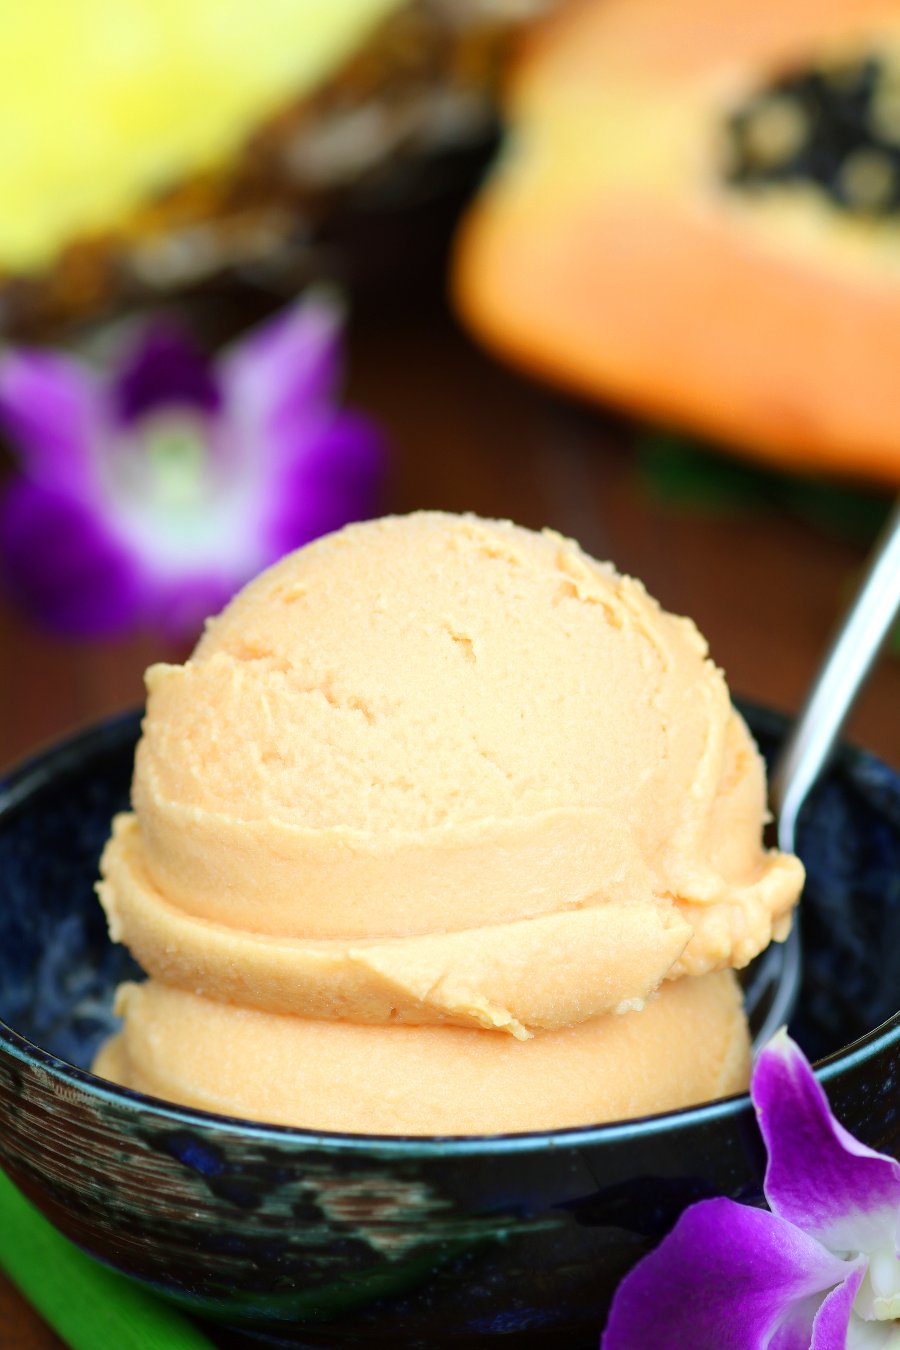 Fragrant tropical fruit blended with creamy coconut milk creates this sweet, cool, and refreshing Papaya Pineapple Sherbet.